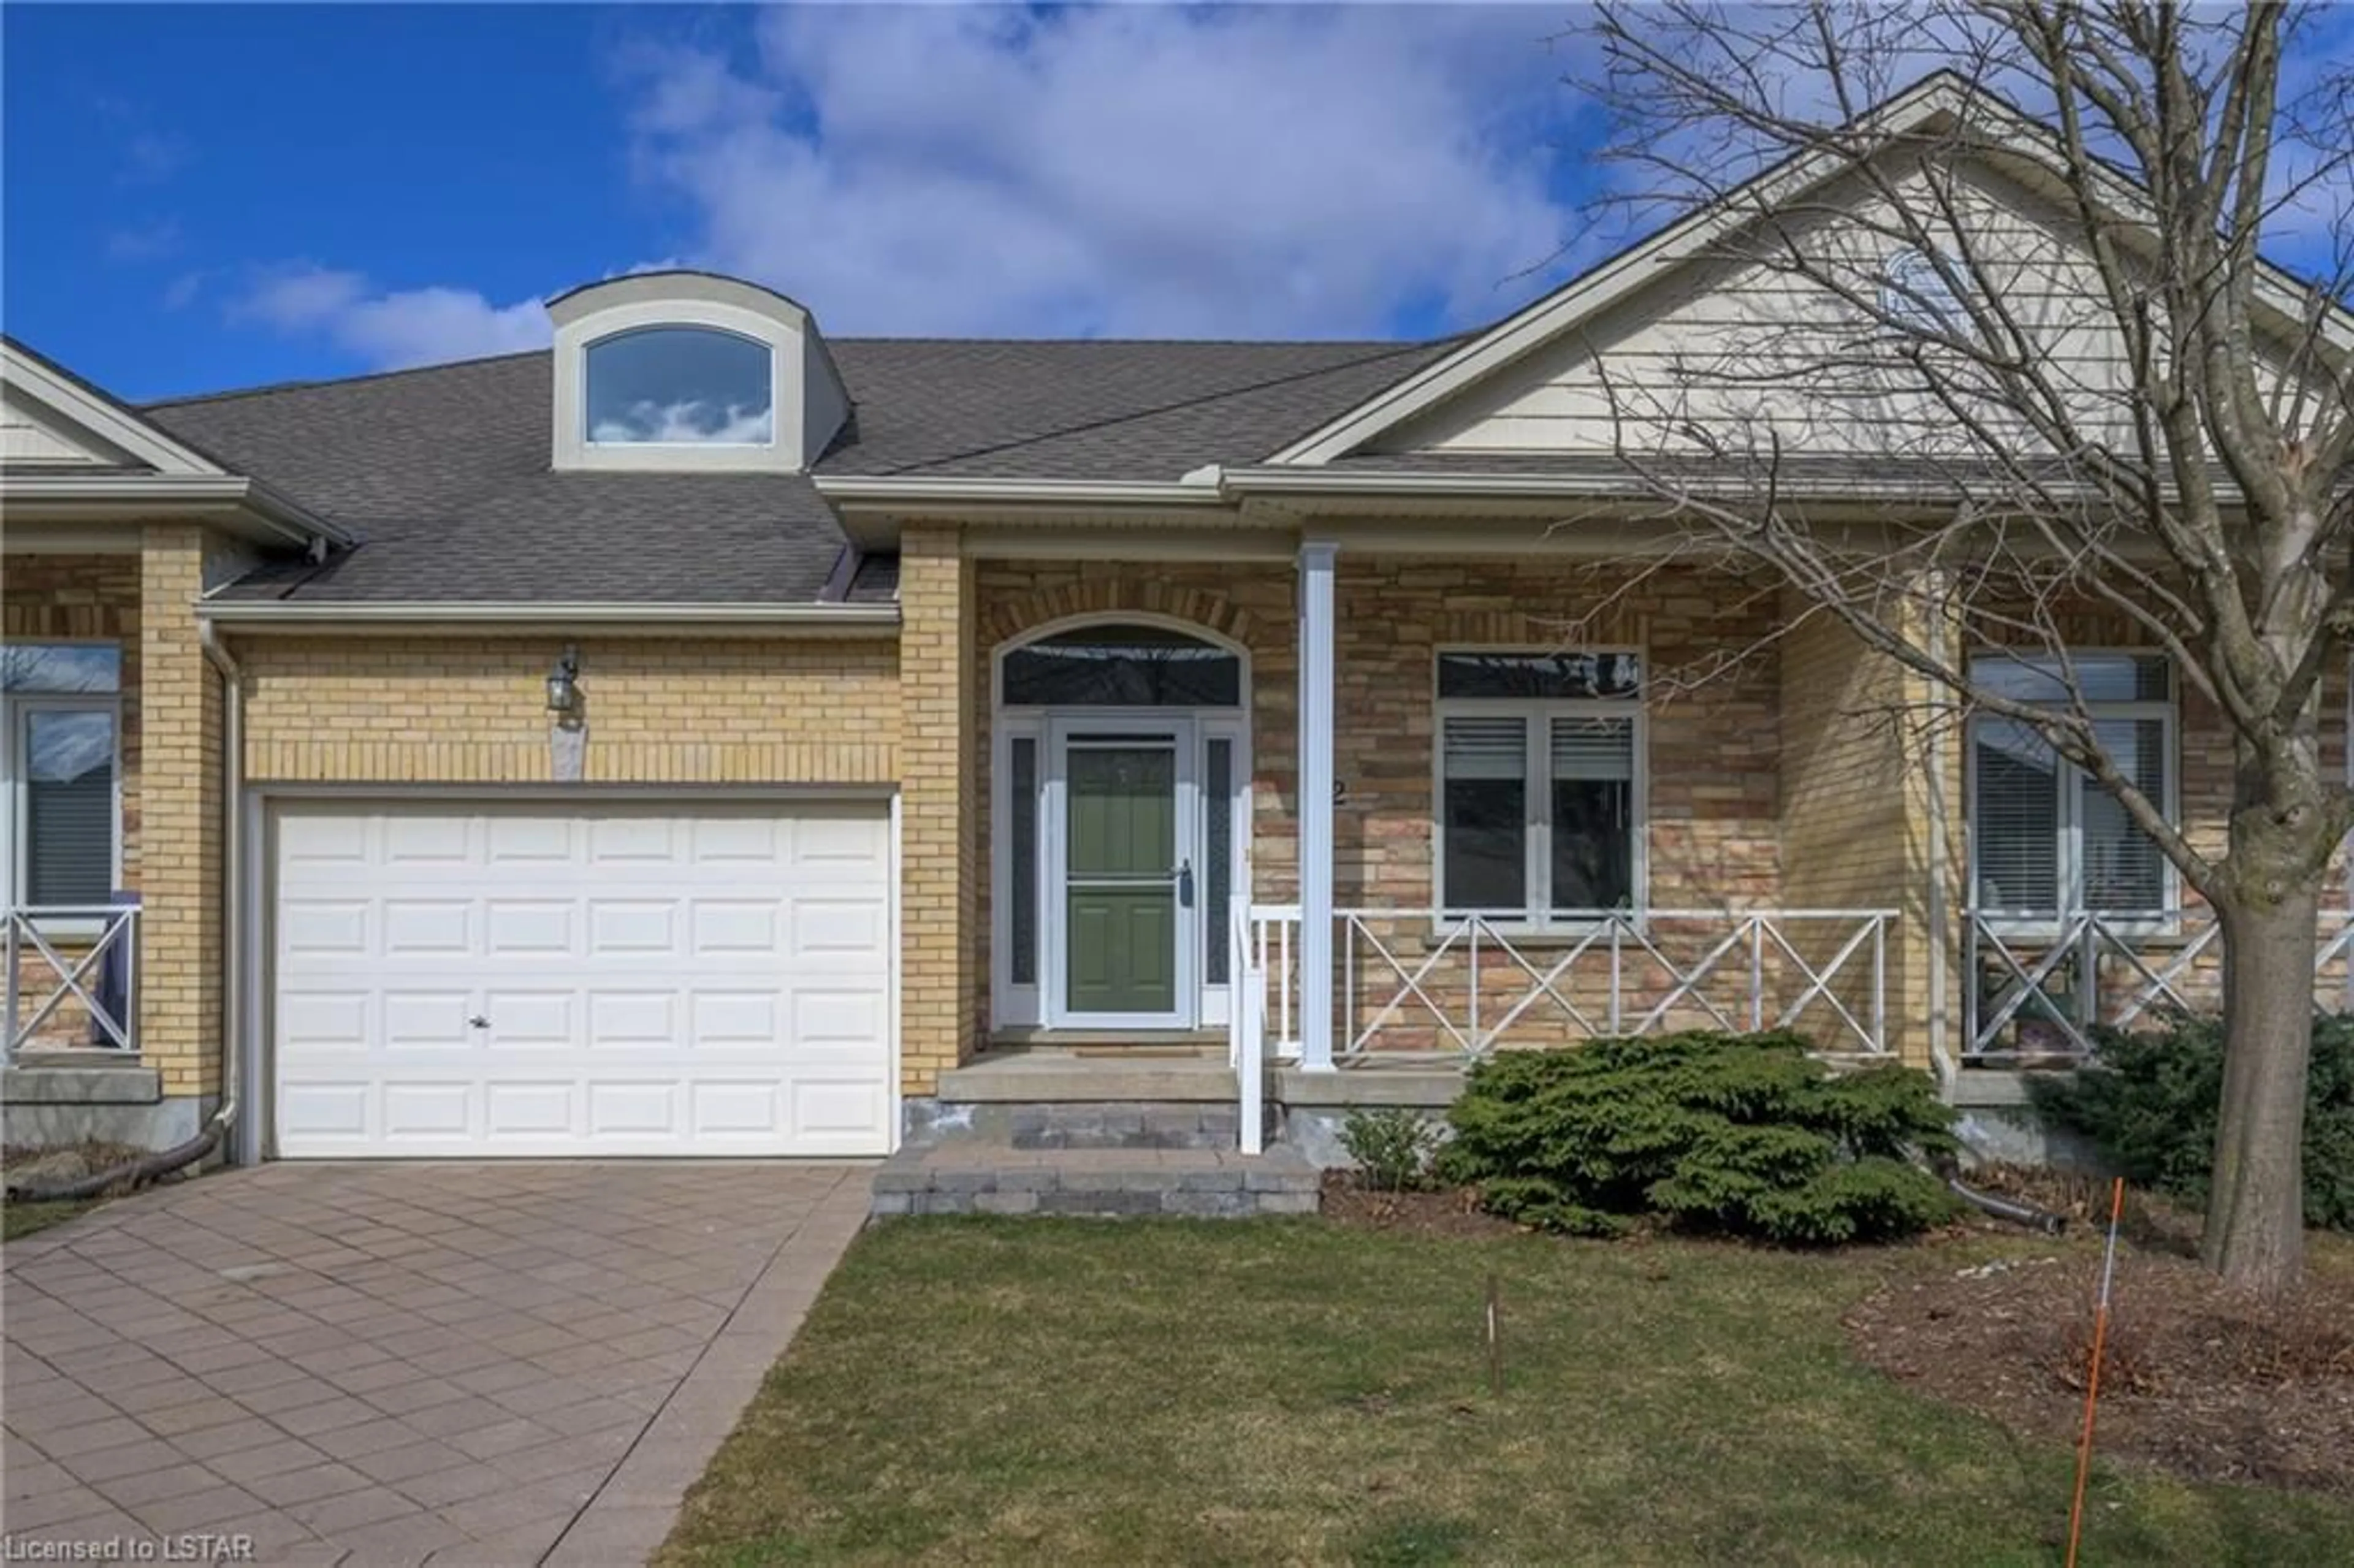 Home with brick exterior material for 947 Adirondack Rd #2, London Ontario N6K 4Y7